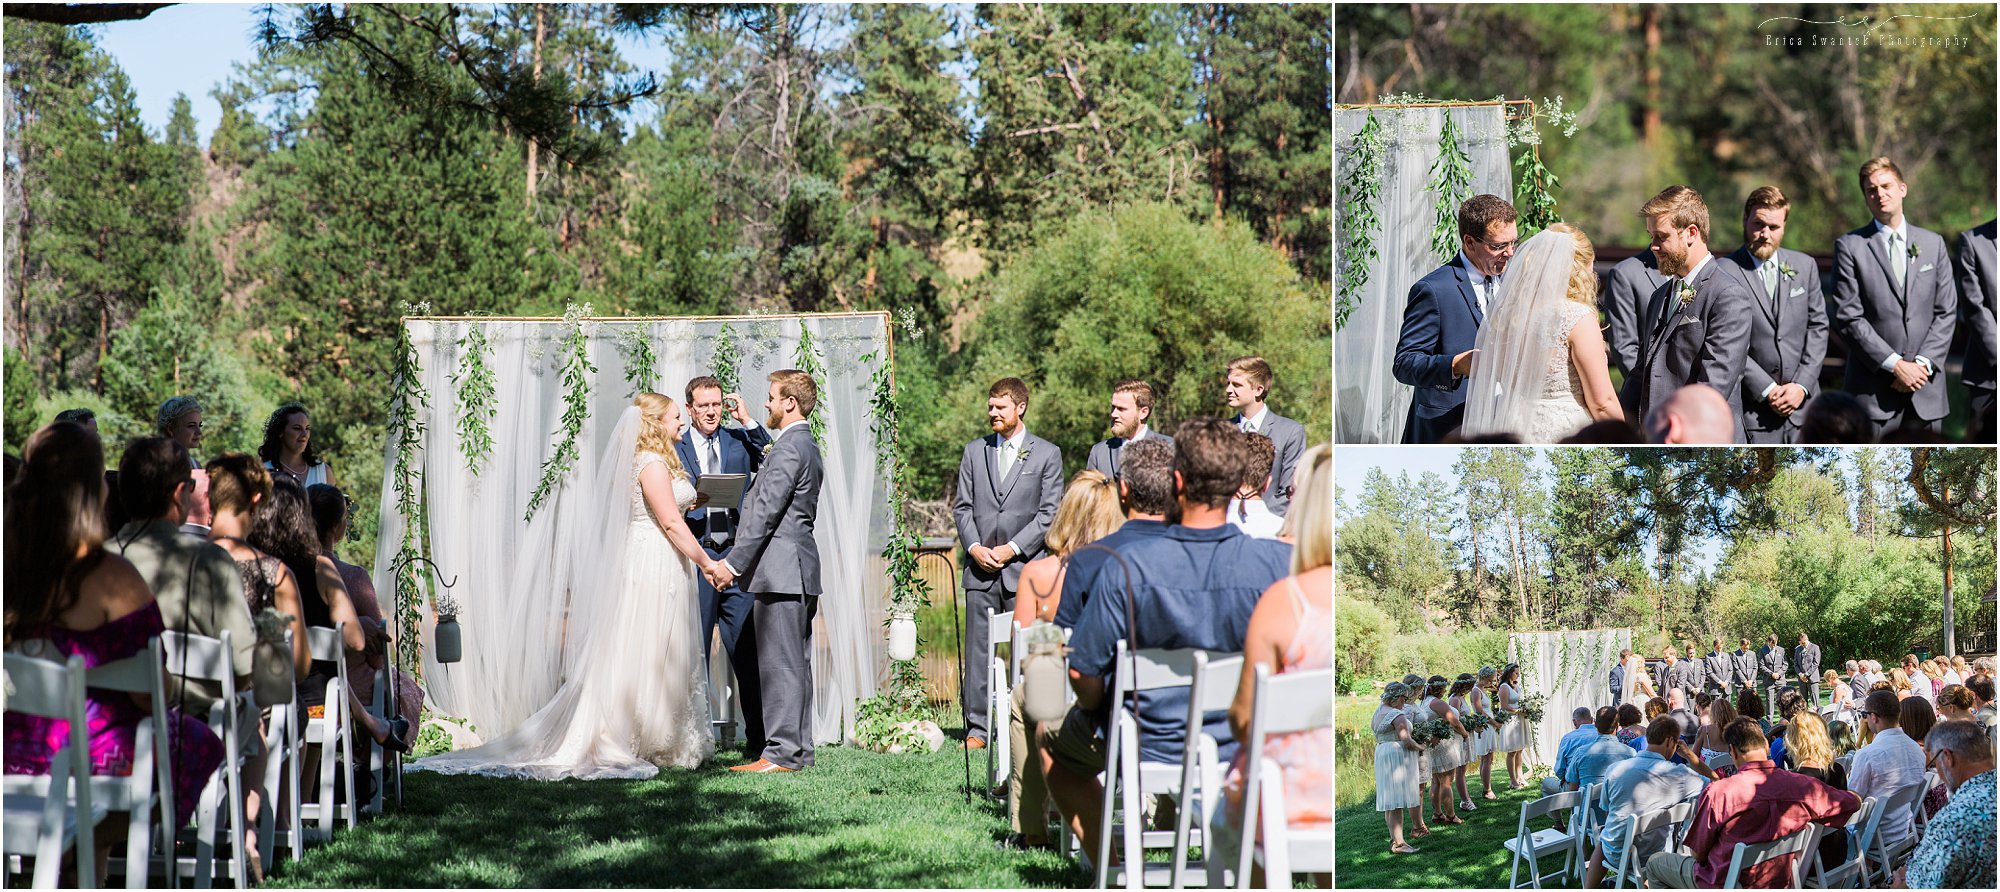 A gorgeous Aspen Hall wedding in Bend, OR. | Erica Swantek Photography